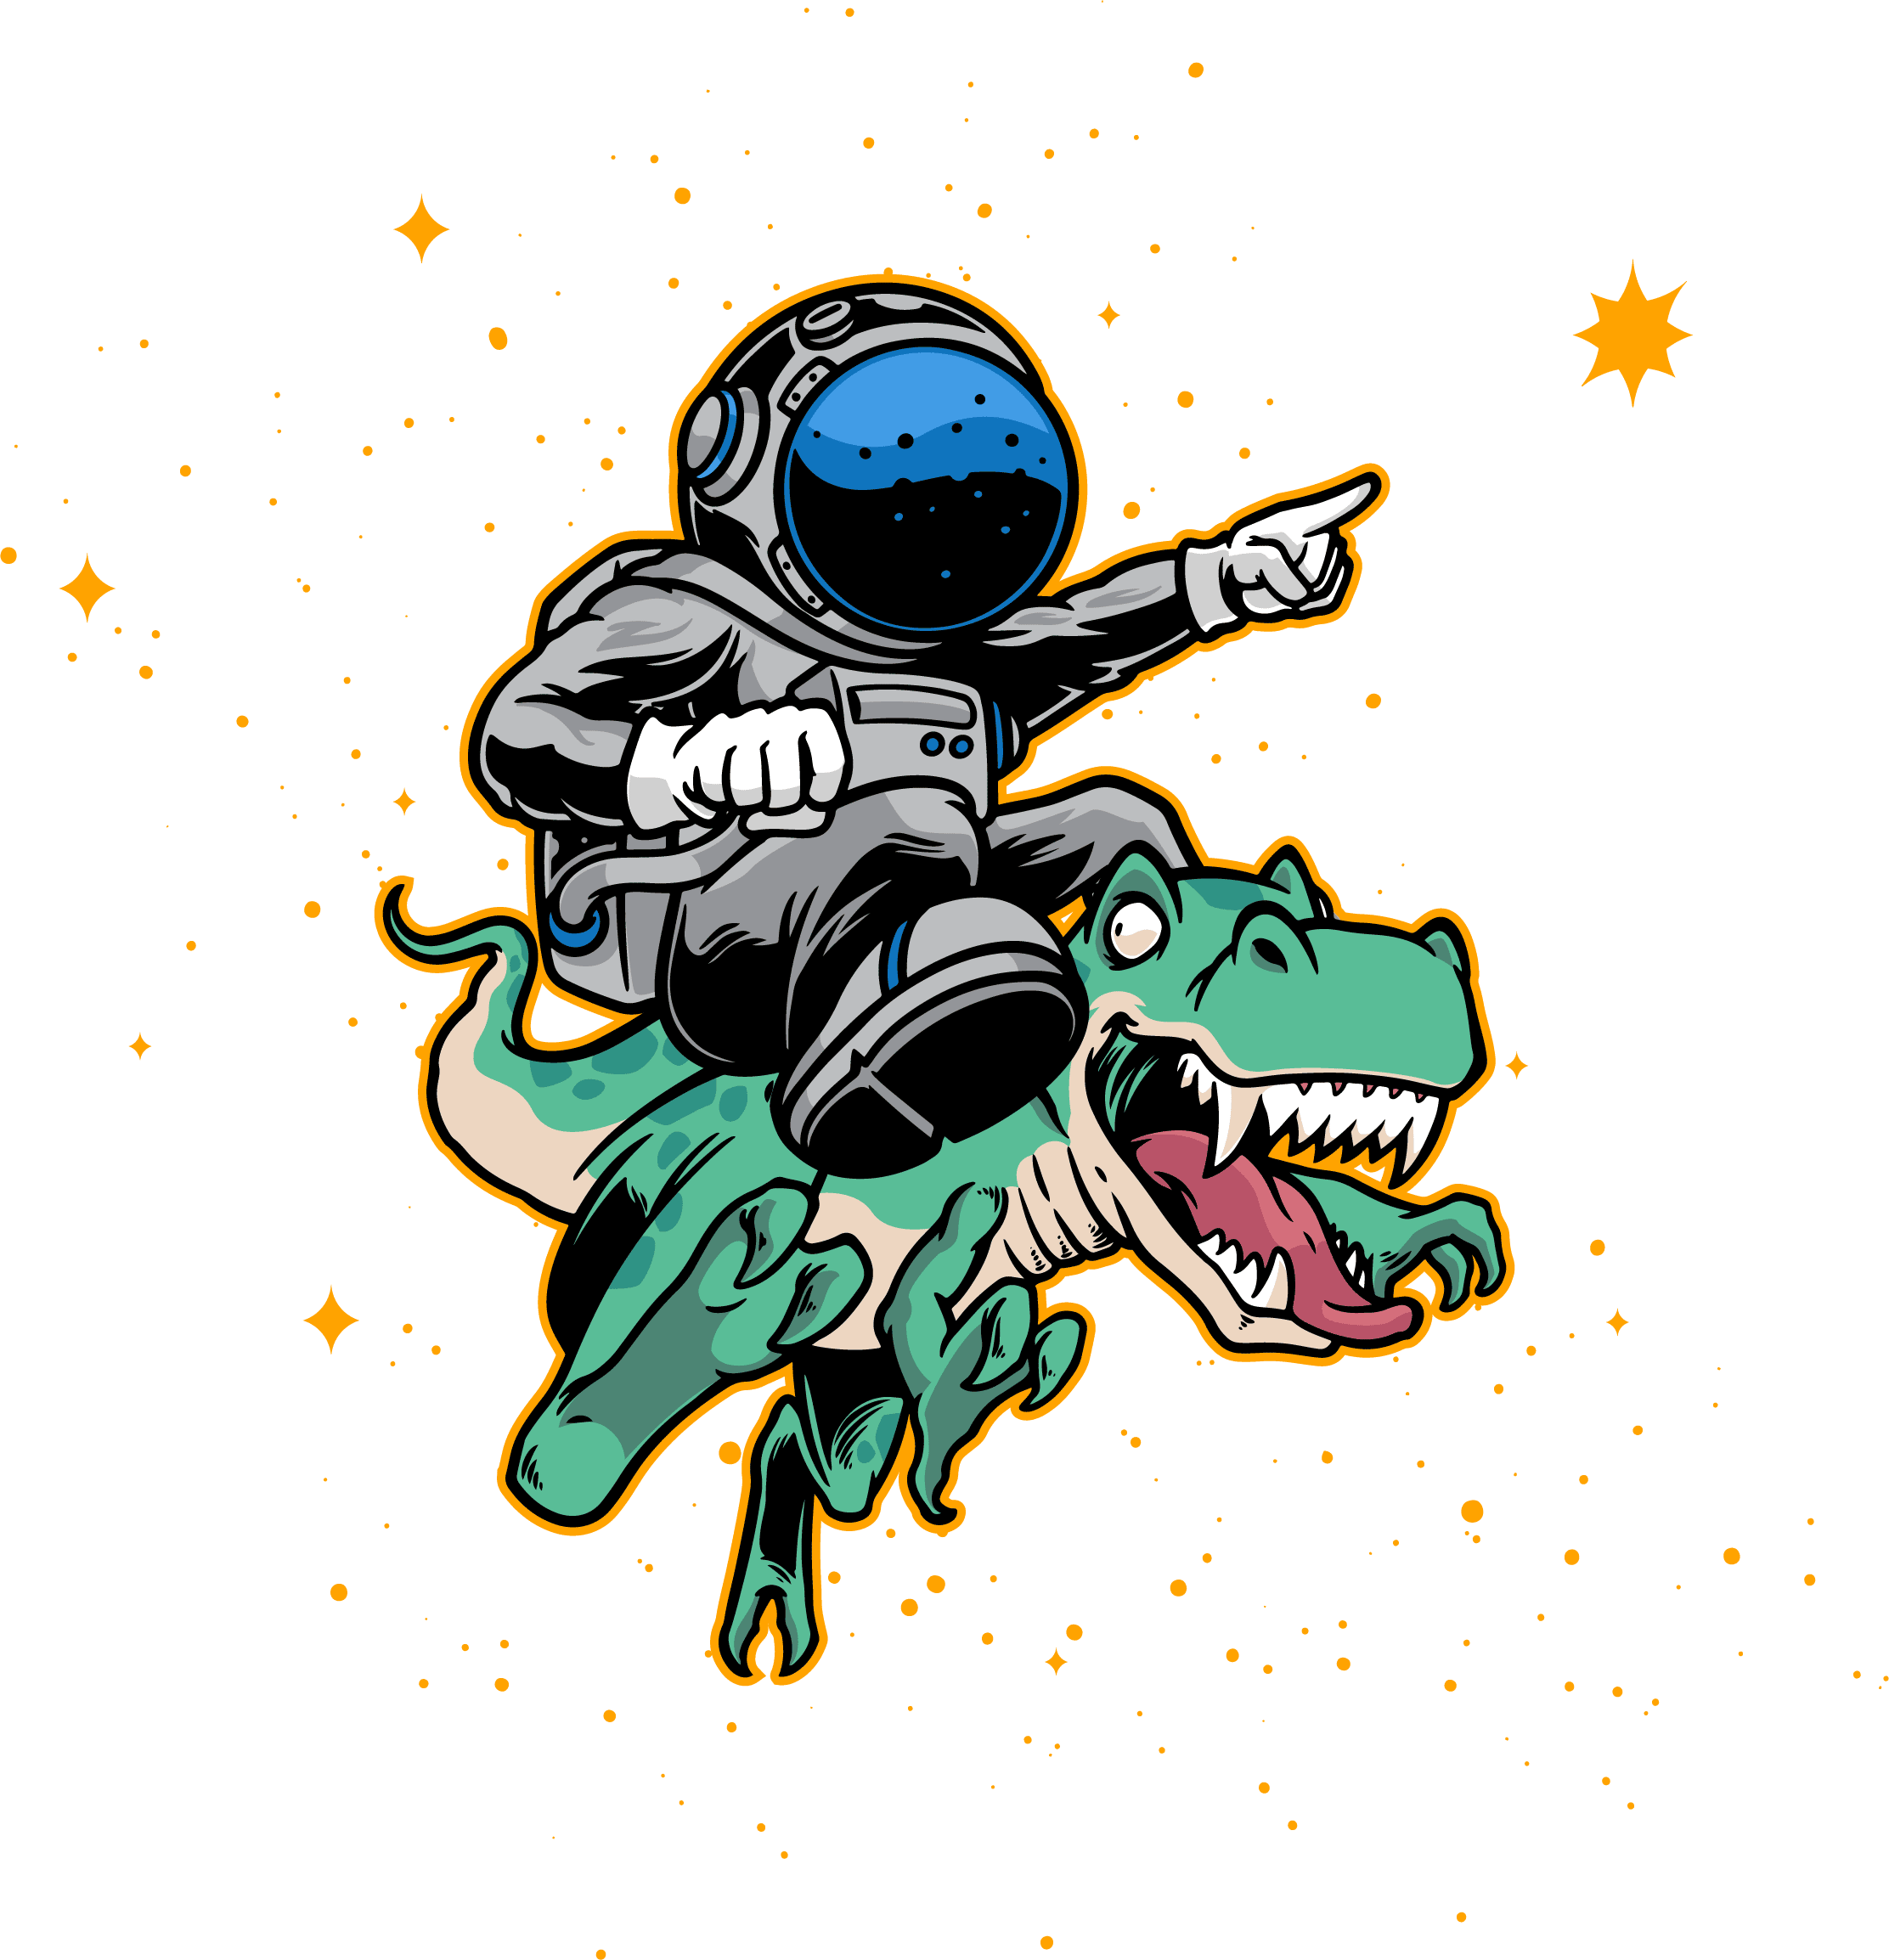 astronaut riding on a dinosaur pointing to text that says welcome to the wonderful world of open source